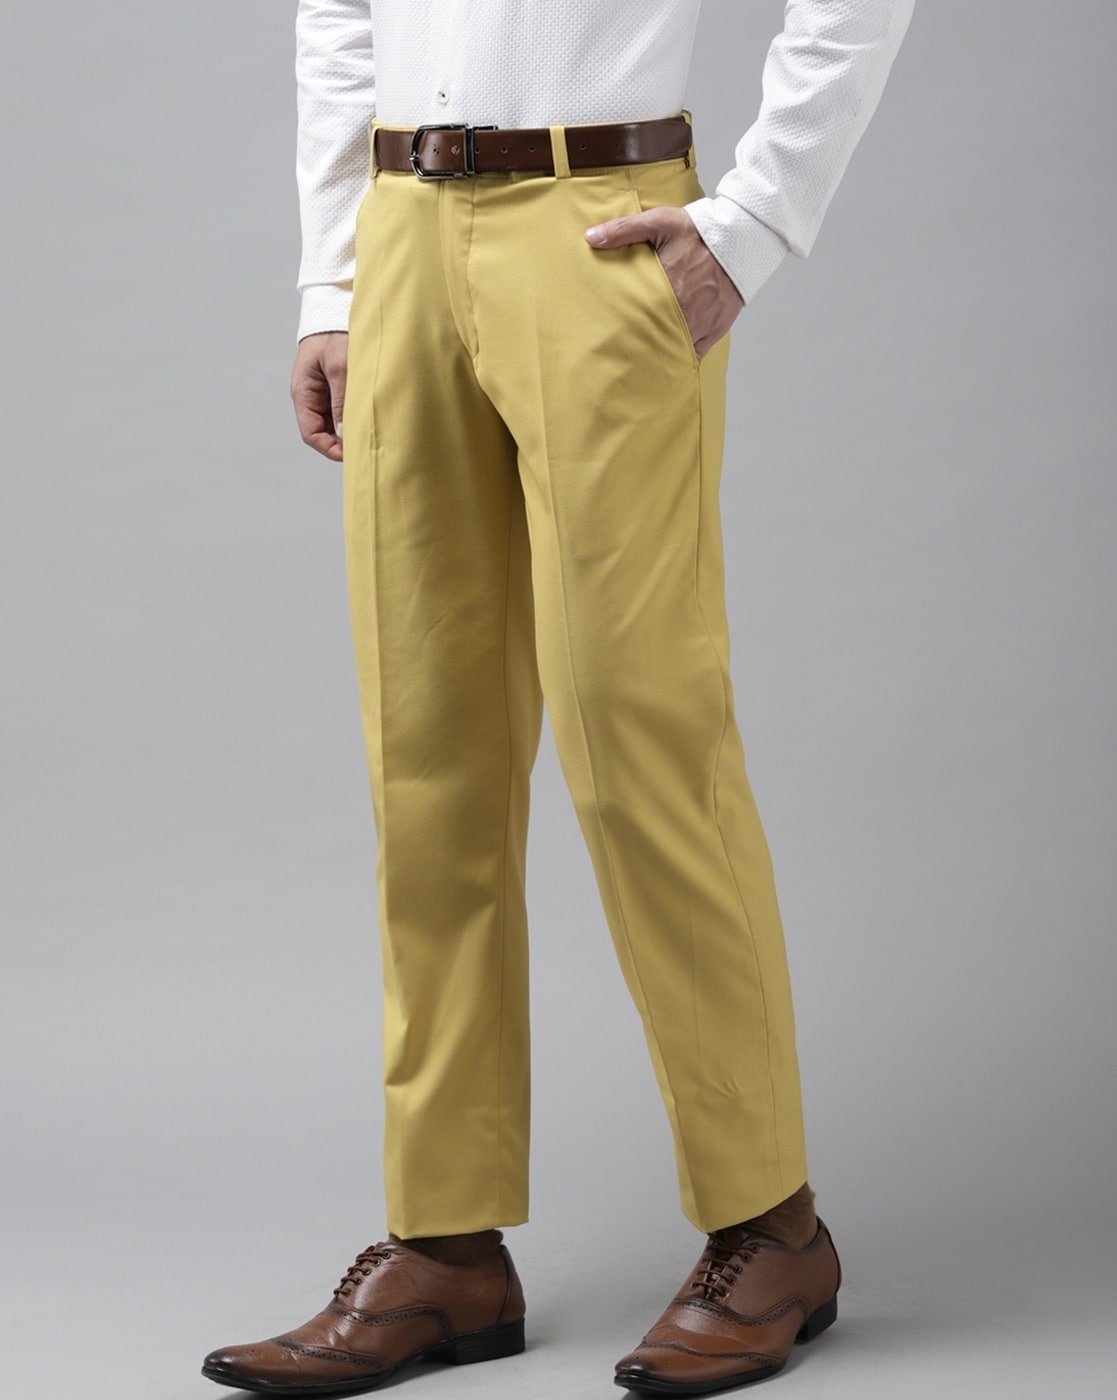 Buy Yellow Color Bottomwear Casual Wear Tom-Boy Harem Pants Clothing for  Girl Jollee